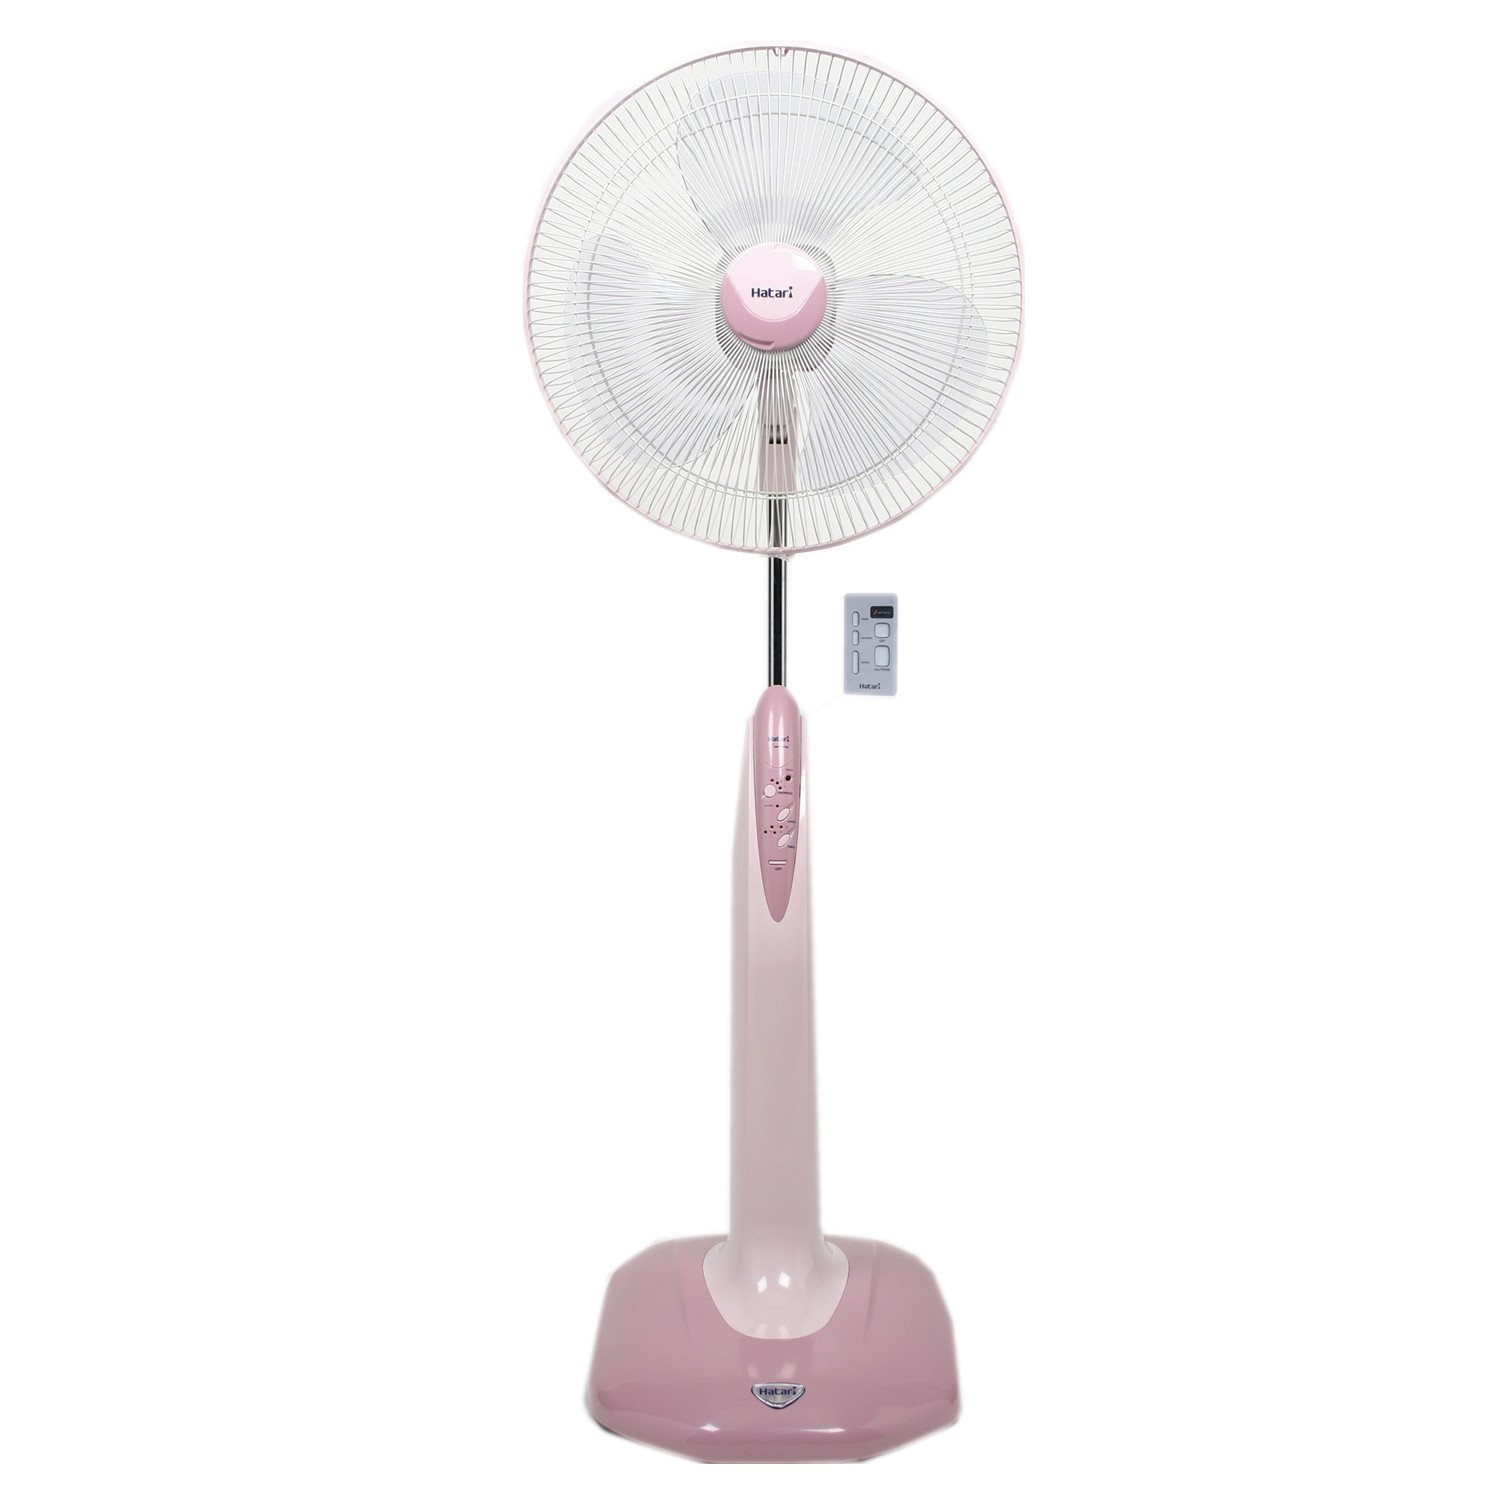 Hatari Stand Fan (18", Mixed Color) HFP18R1 